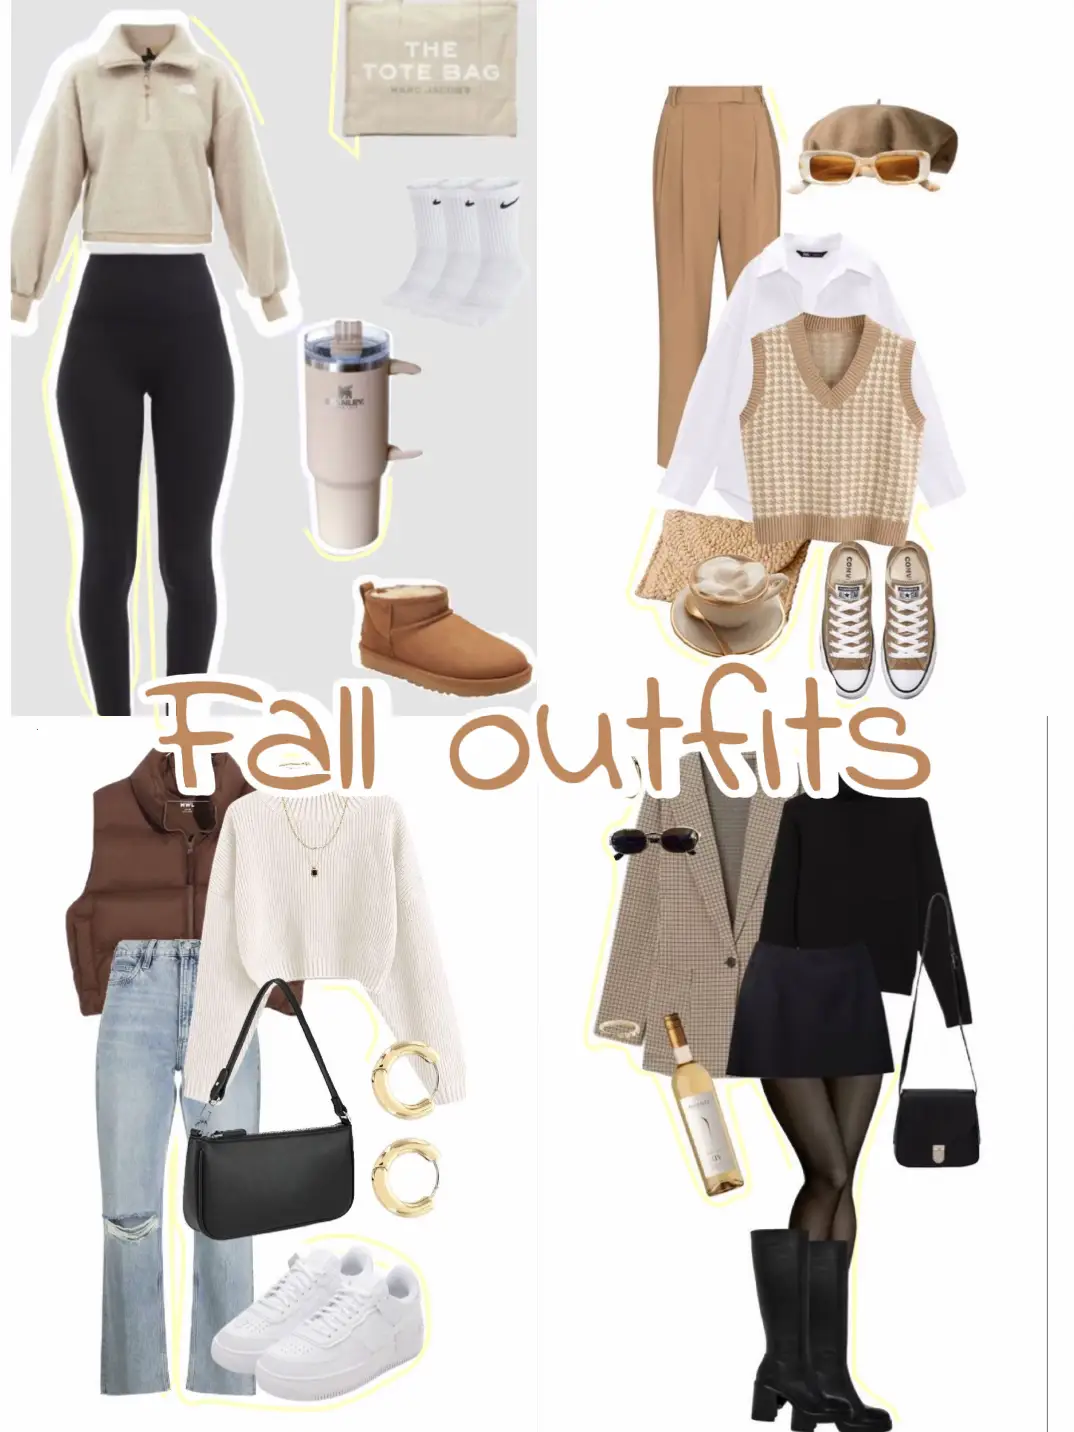 8 Fall Worthy Thigh High Socks Outfit Ideas - MY CHIC OBSESSION